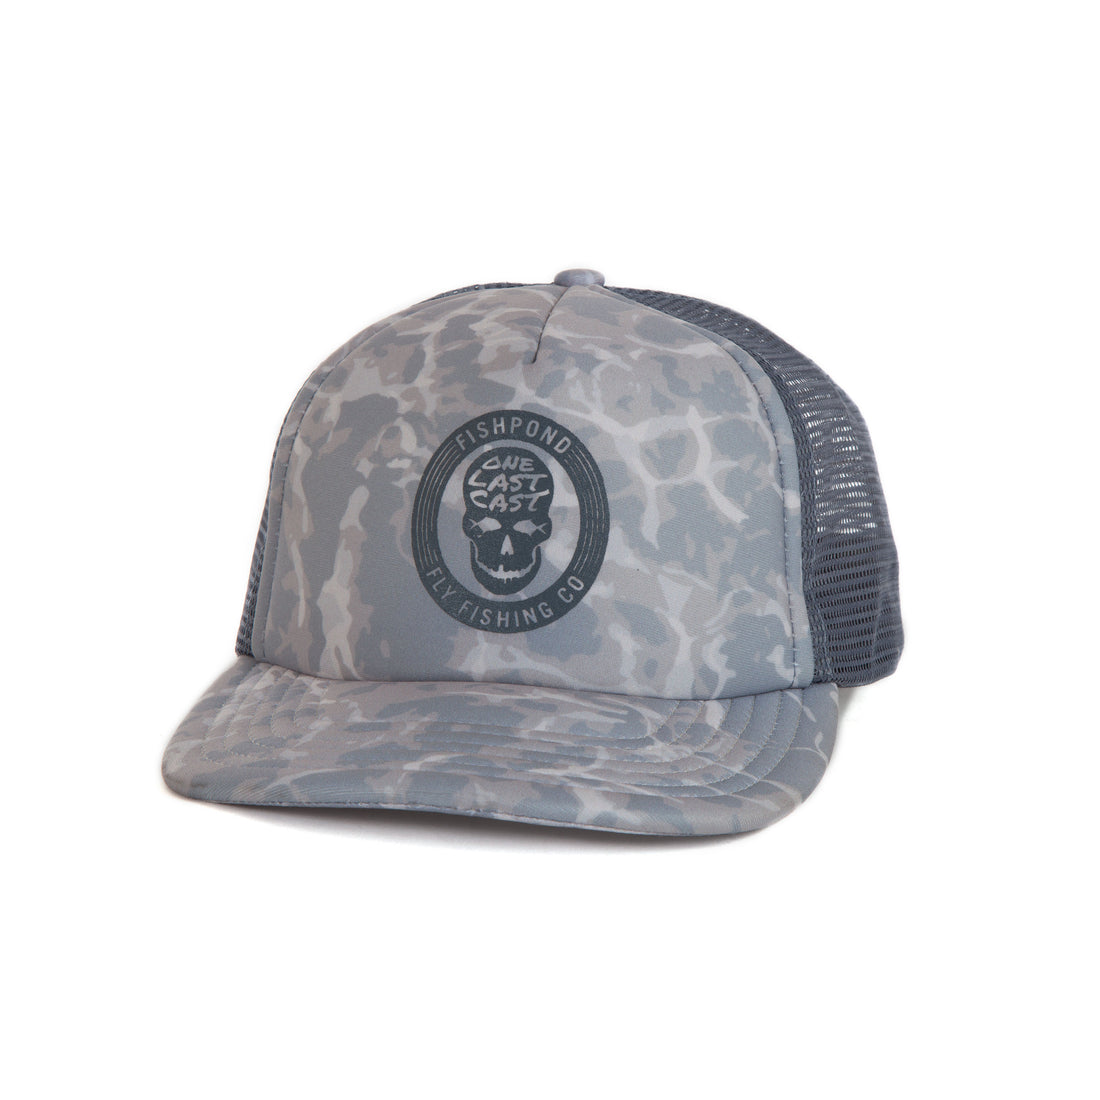 Fishpond Boca Hat – Out Fly Fishing